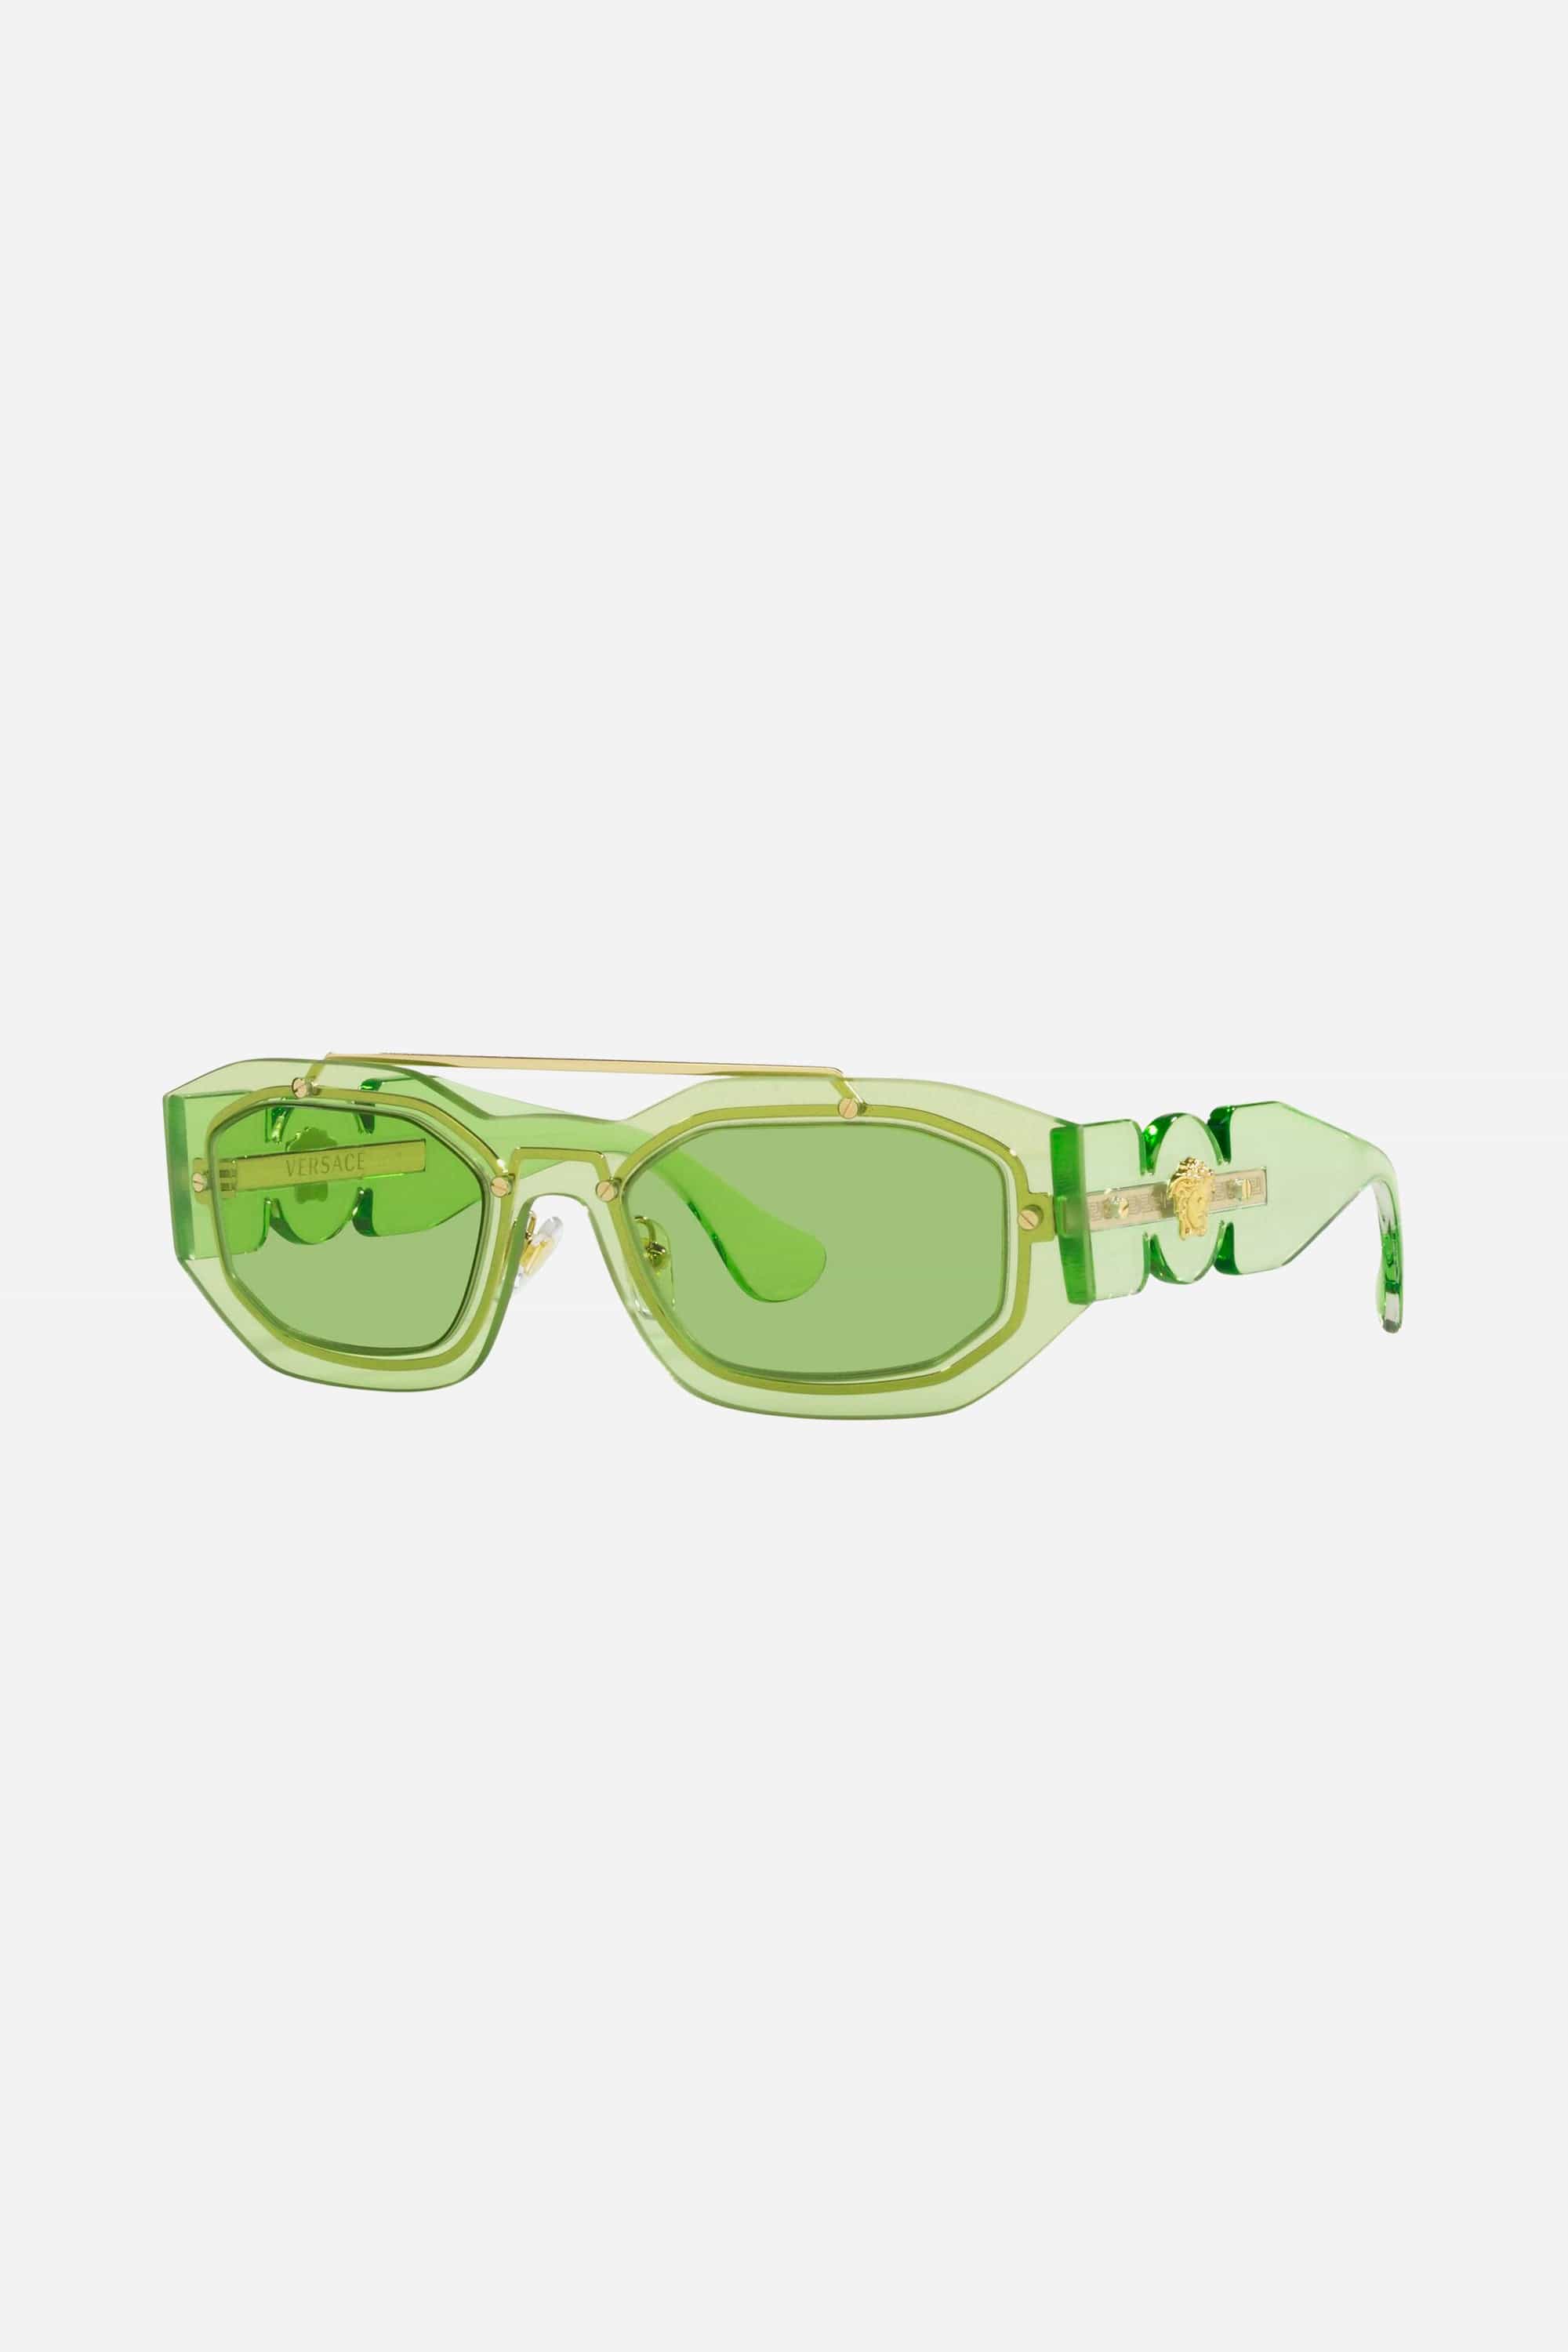 Versace sunglasses in transparent light green with iconic jellyfish - Eyewear Club